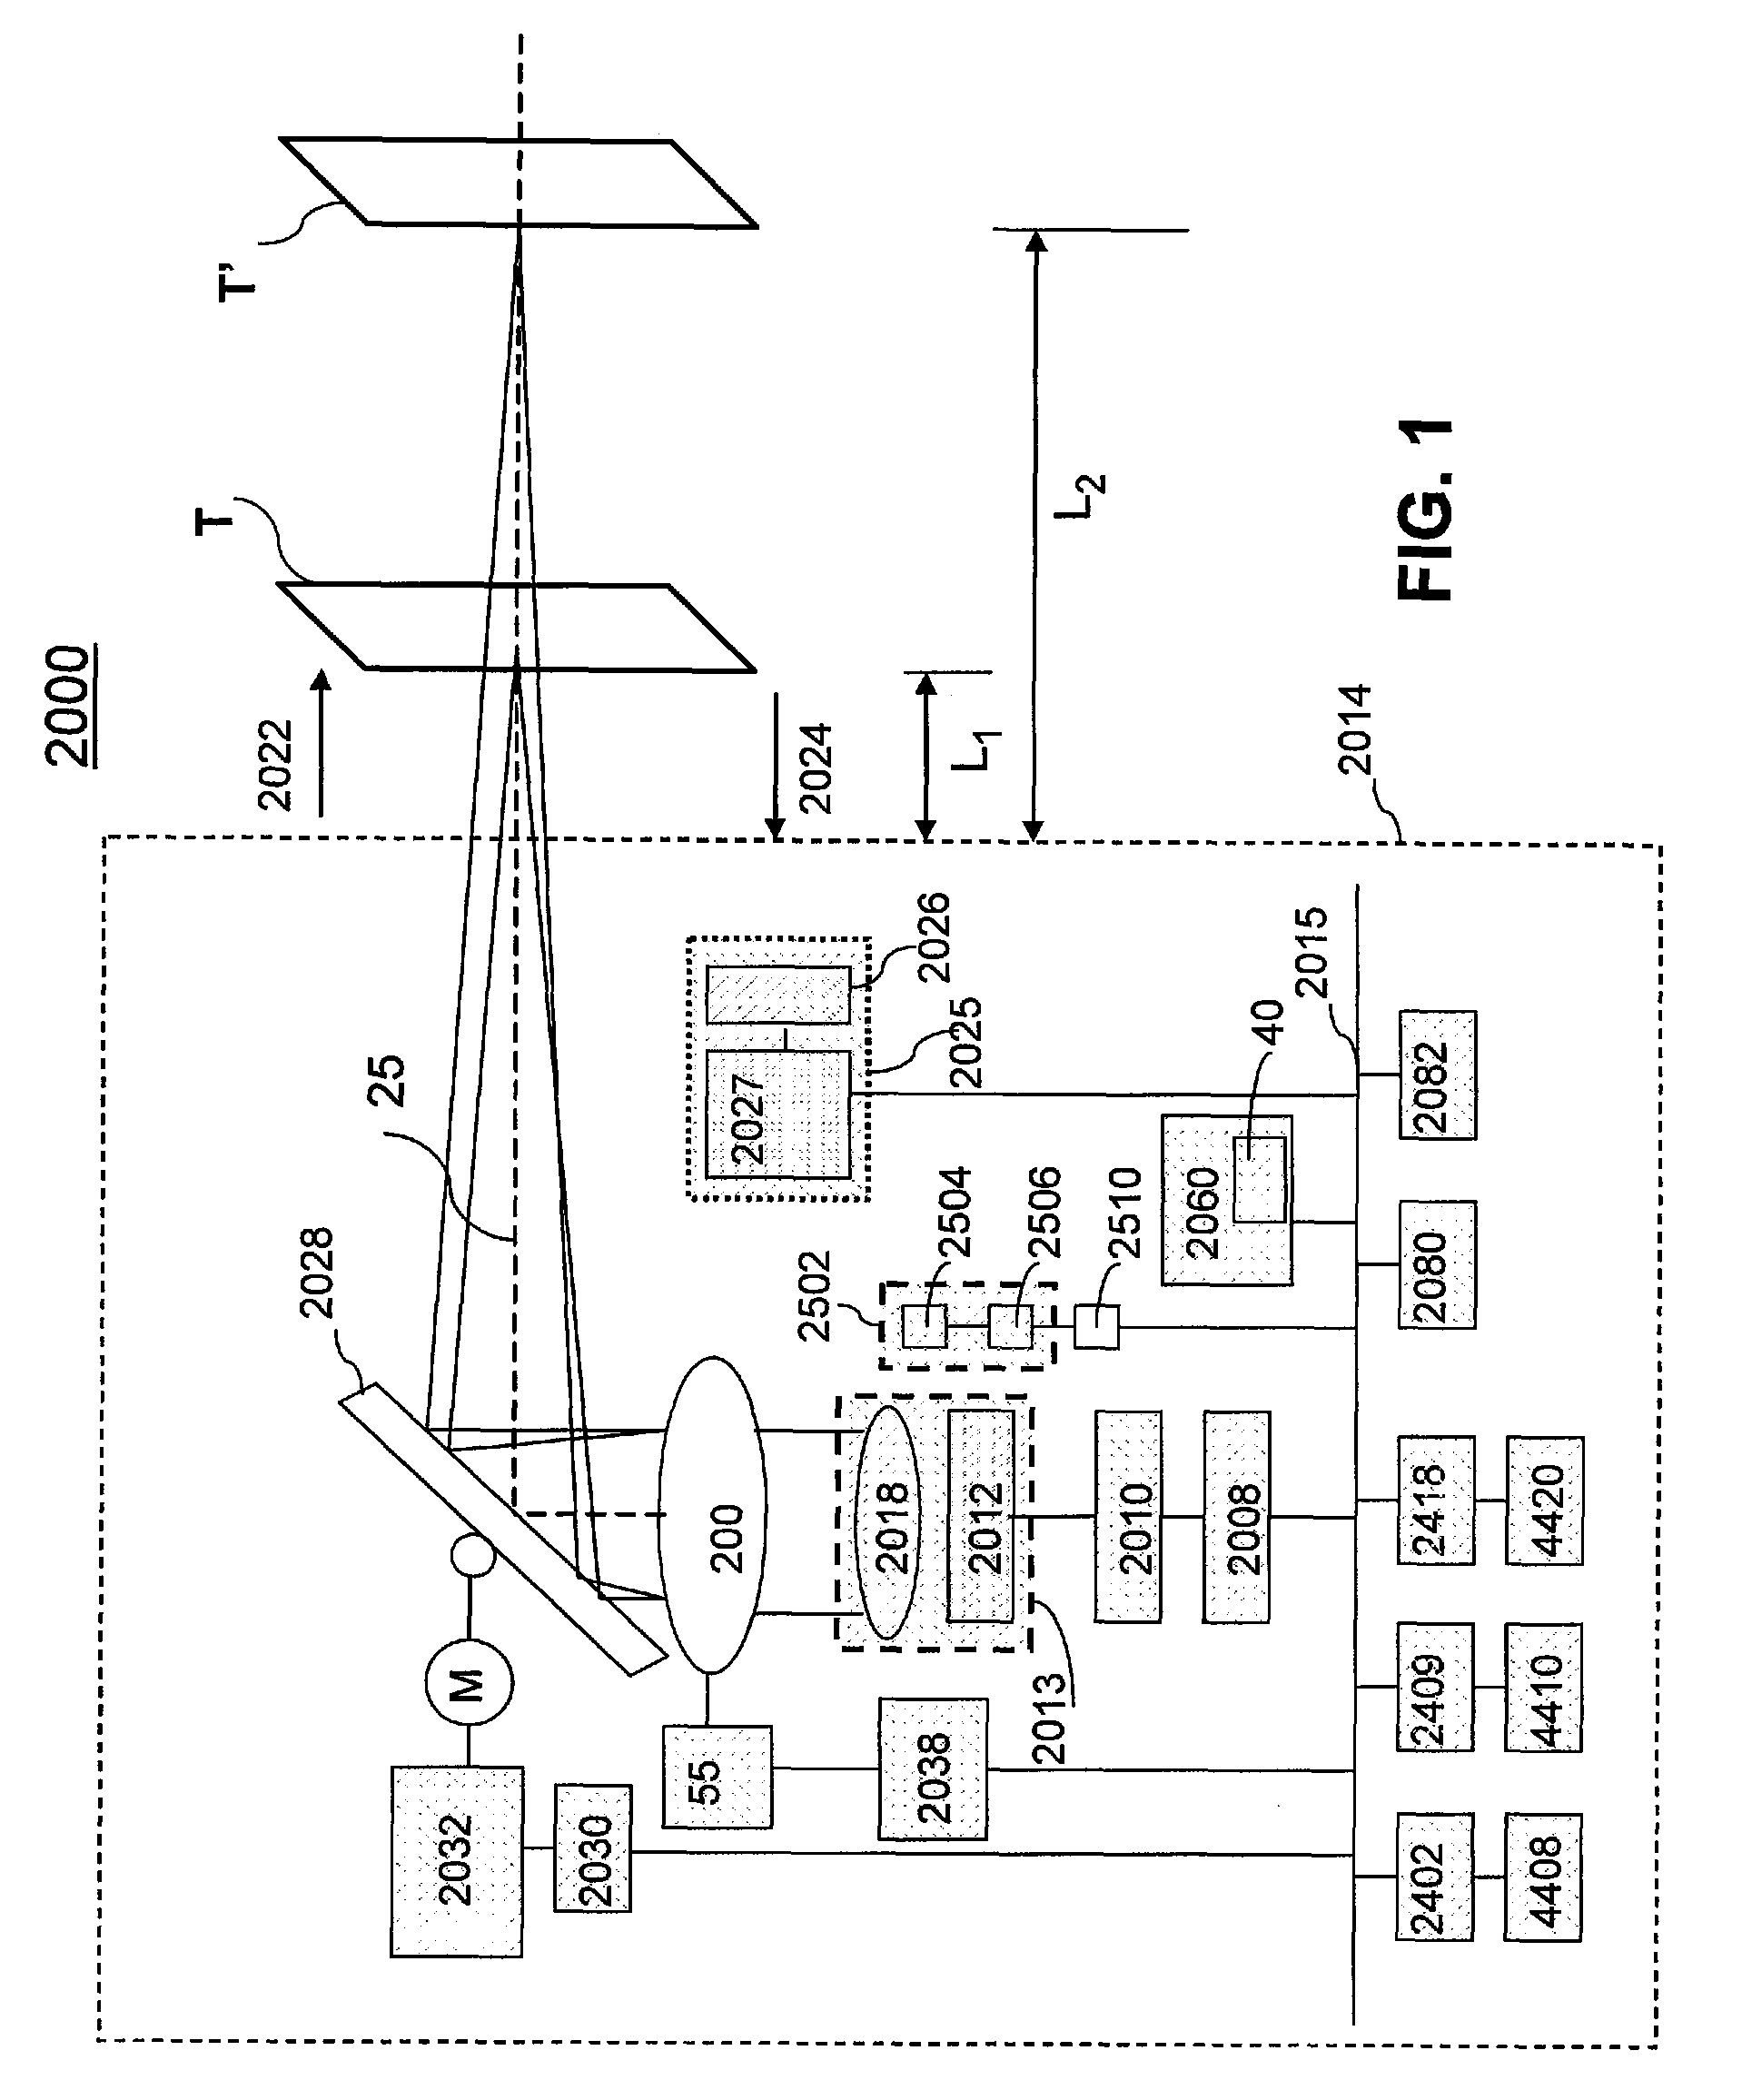 Bar code reader terminal and methods for operating the same having misread detection apparatus